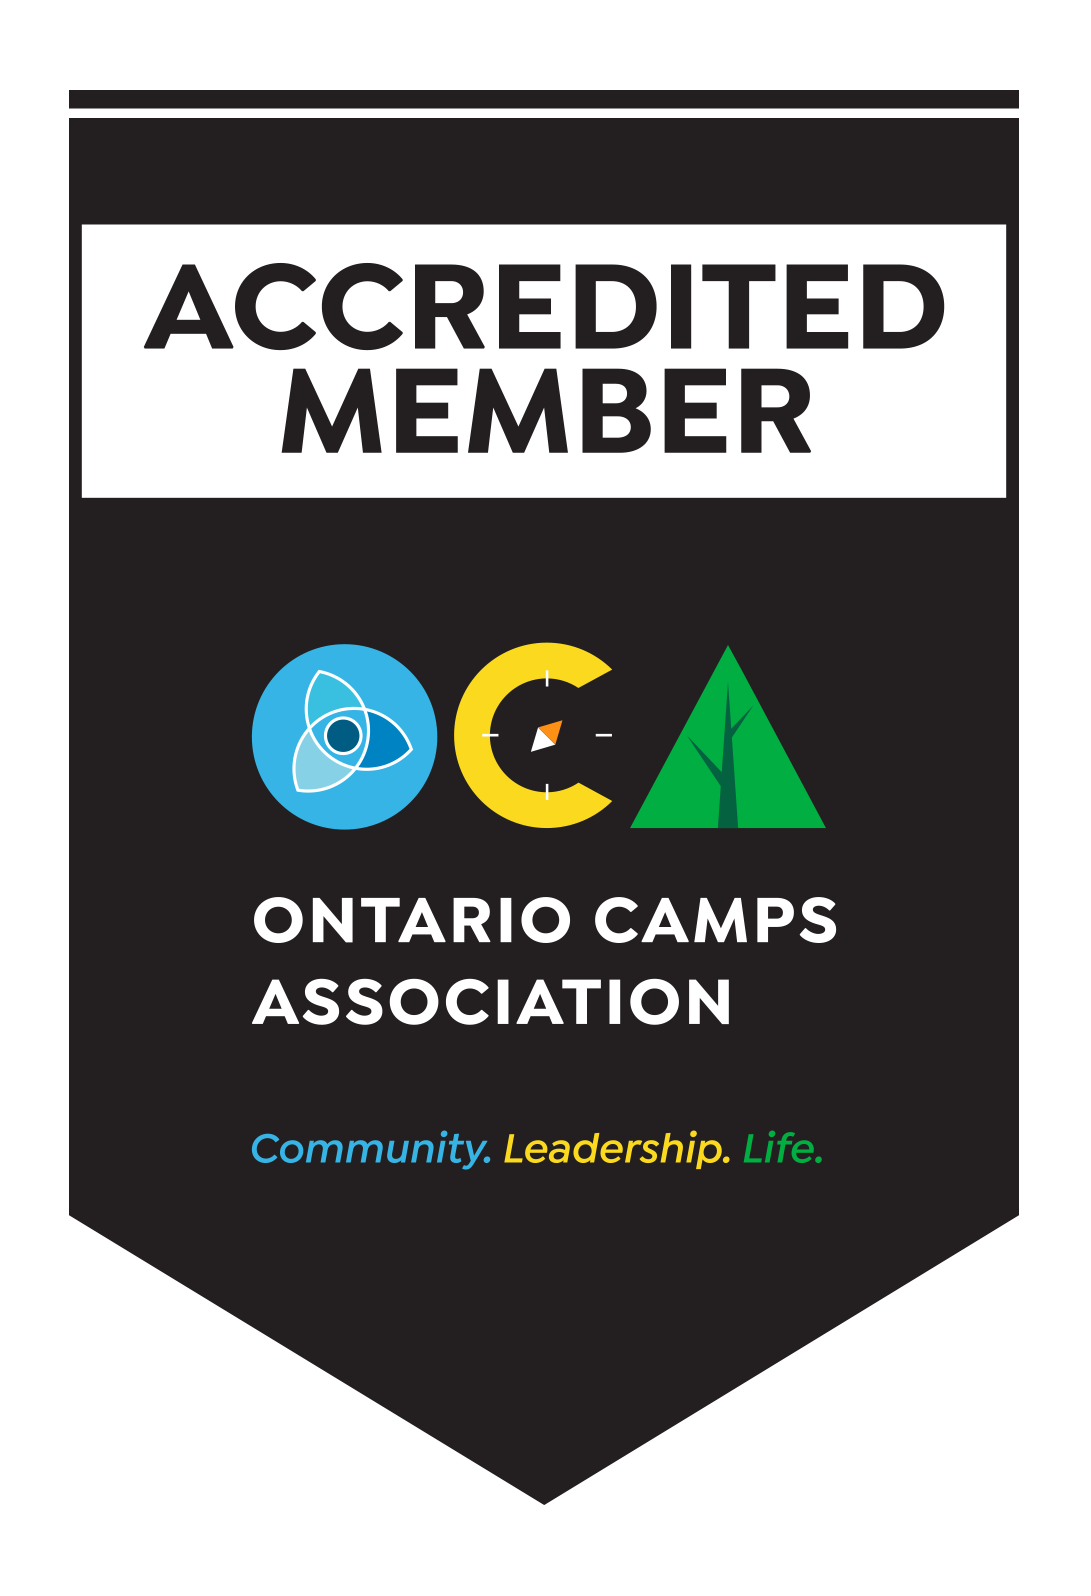 Accredited Member of the Ontario Camps Association